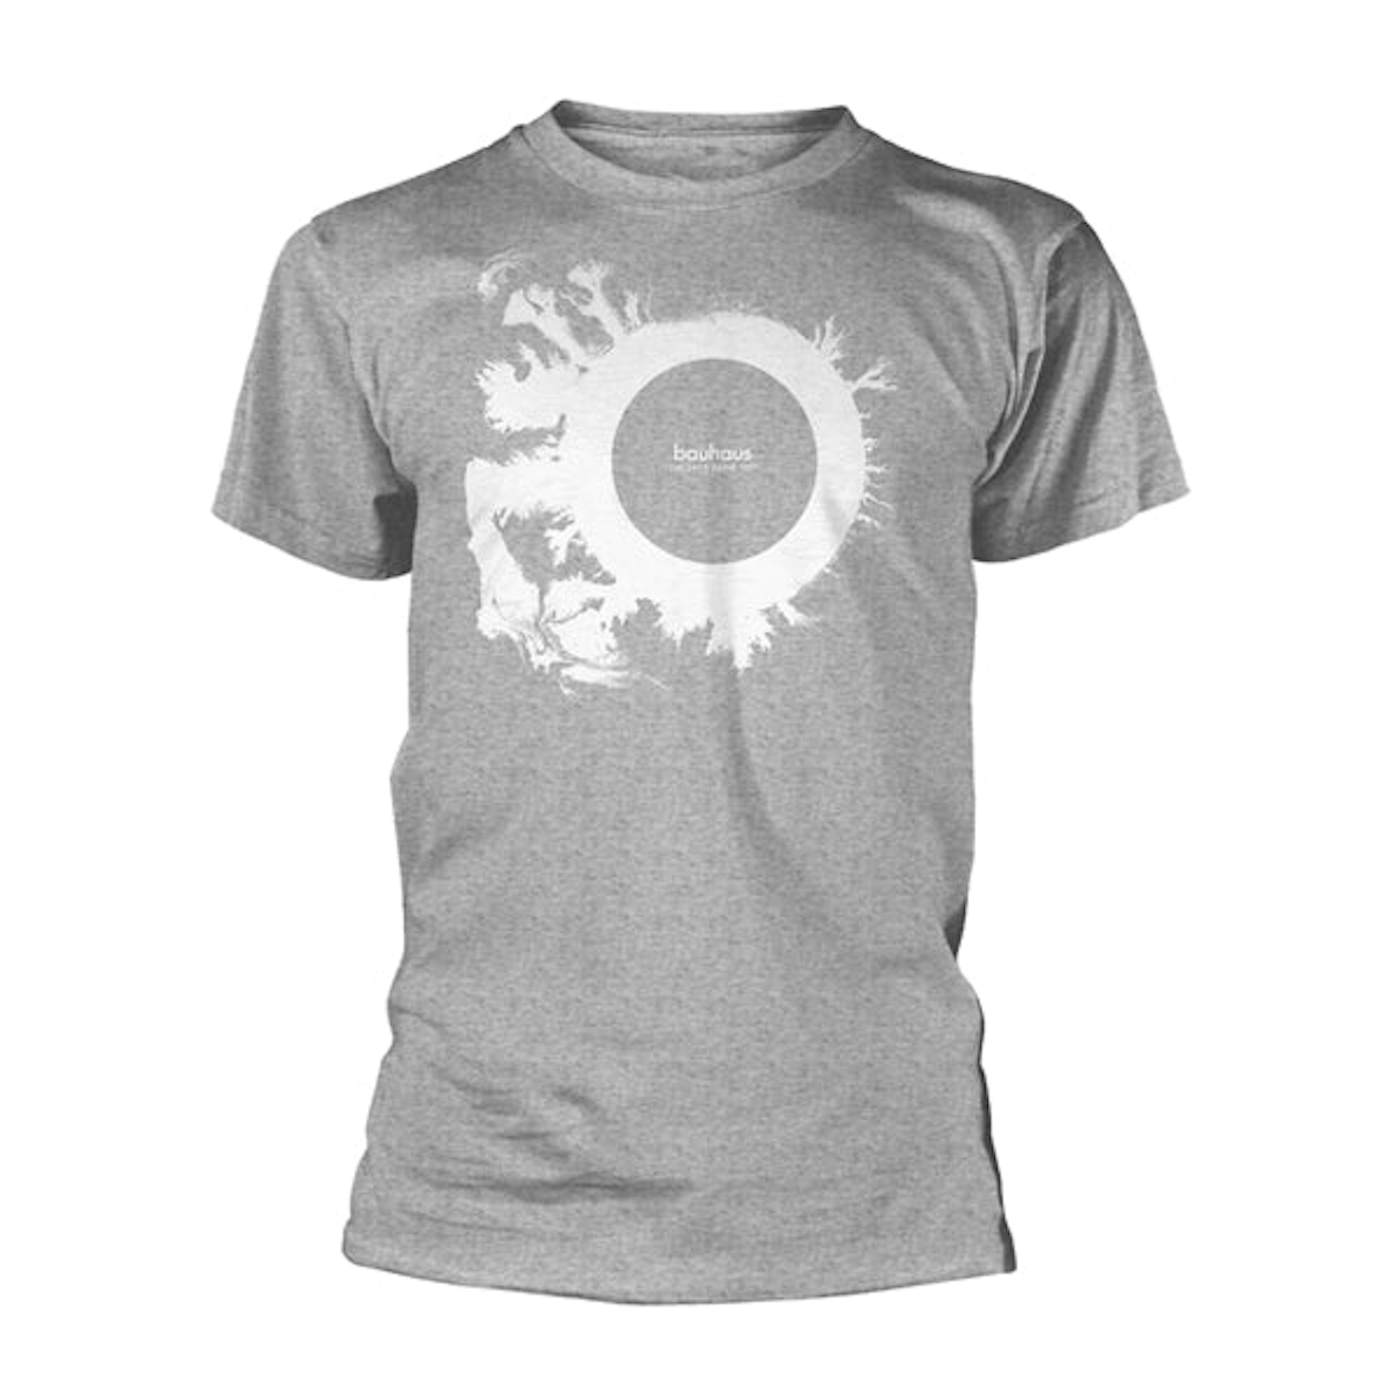 Bauhaus T-Shirt - The Sky's Gone Out (Grey)